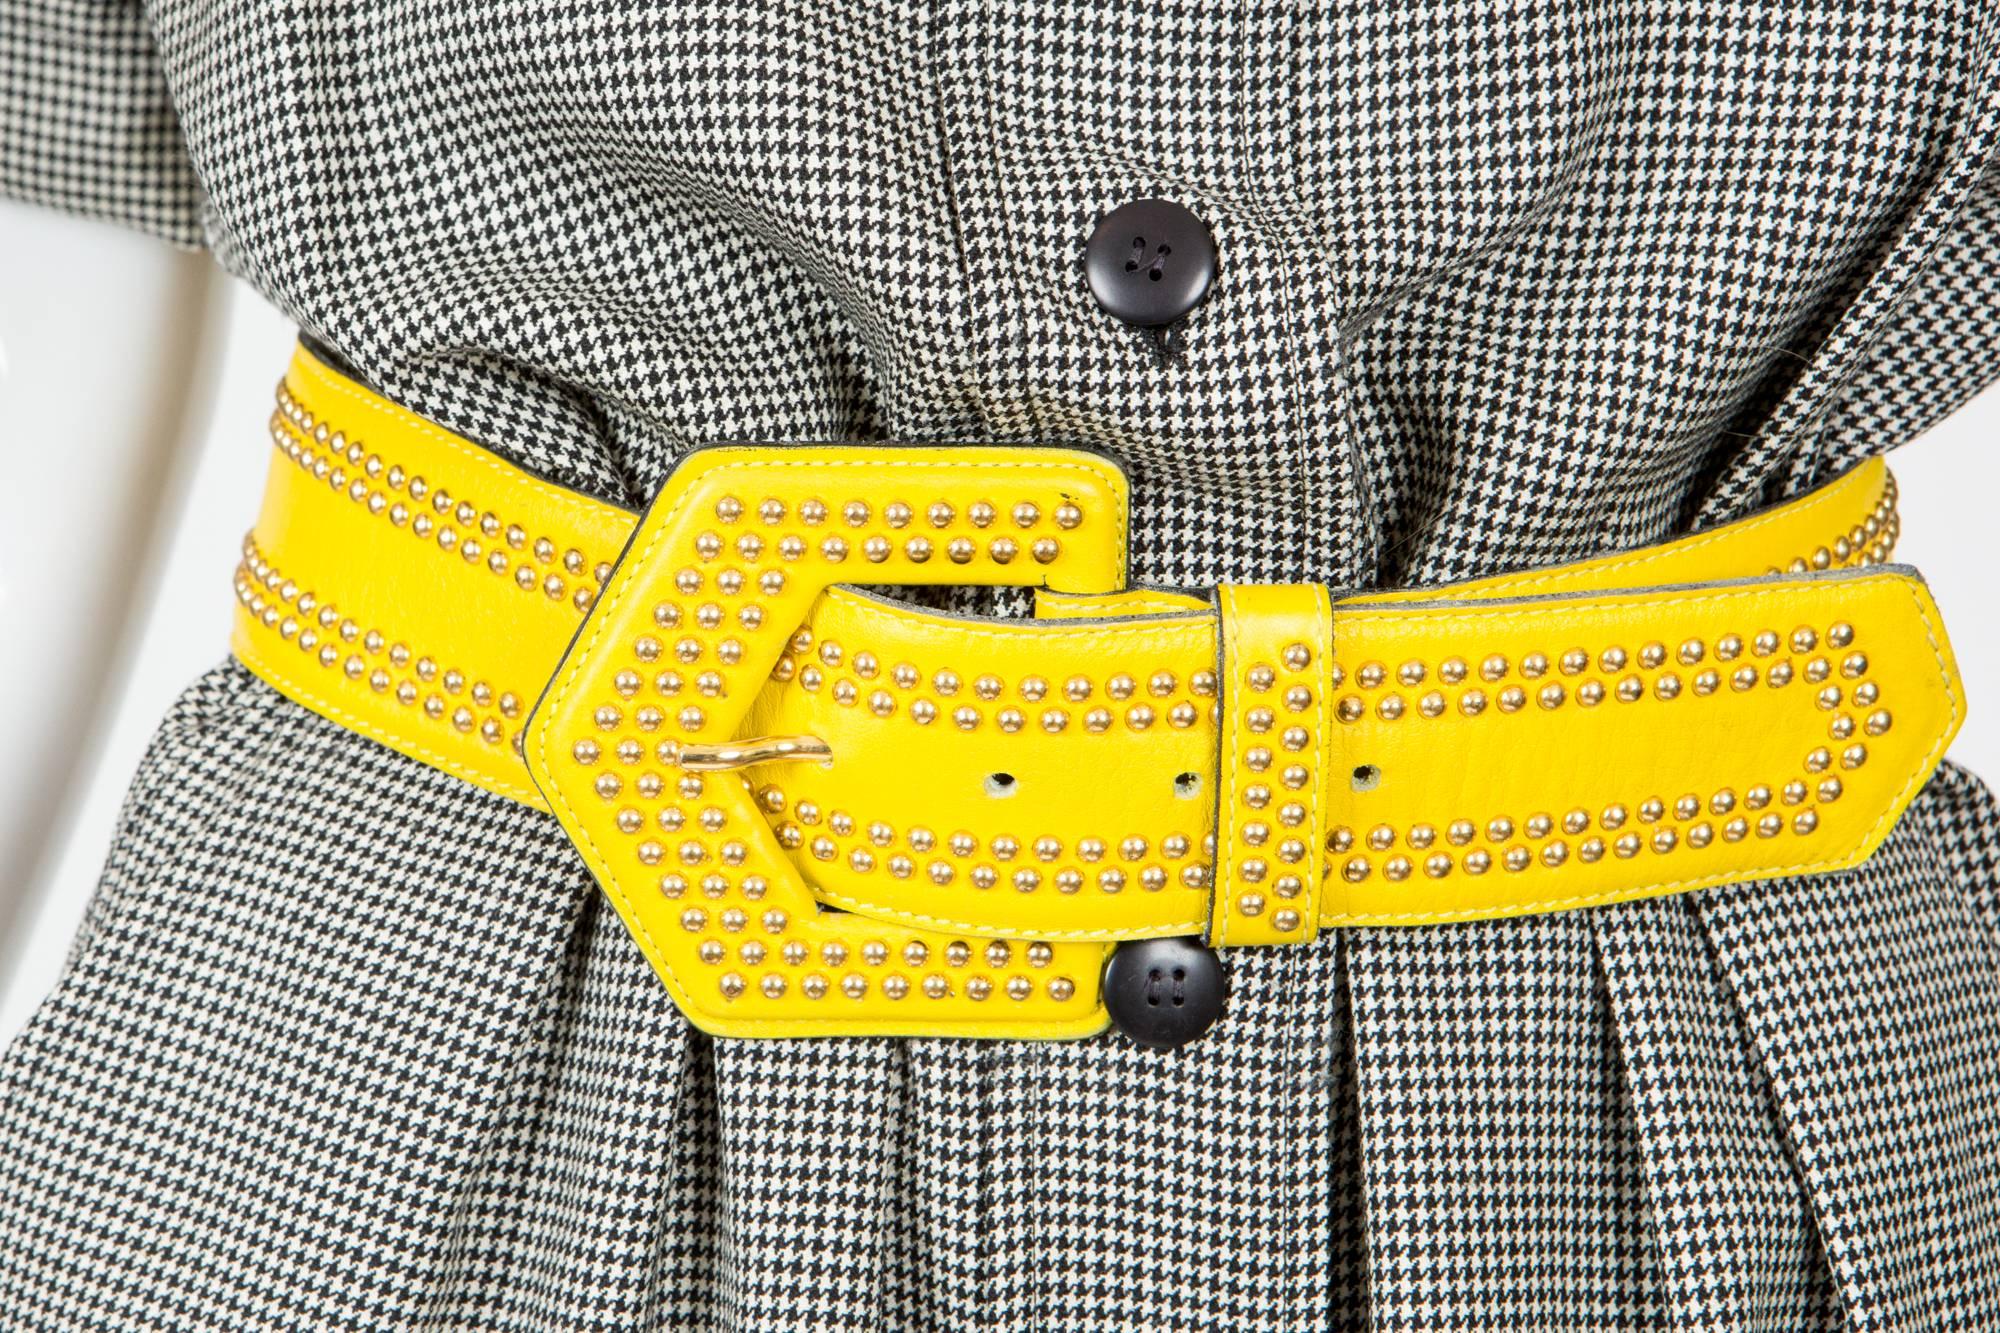 Yves Saint Laurent yellow leather belt featuring  gold tone studs, an inside white leather lining. 
In excellent vintage condition. Made in France.
Estimated size  75 cm
We guarantee you will receive this gorgeous item as described and showed on